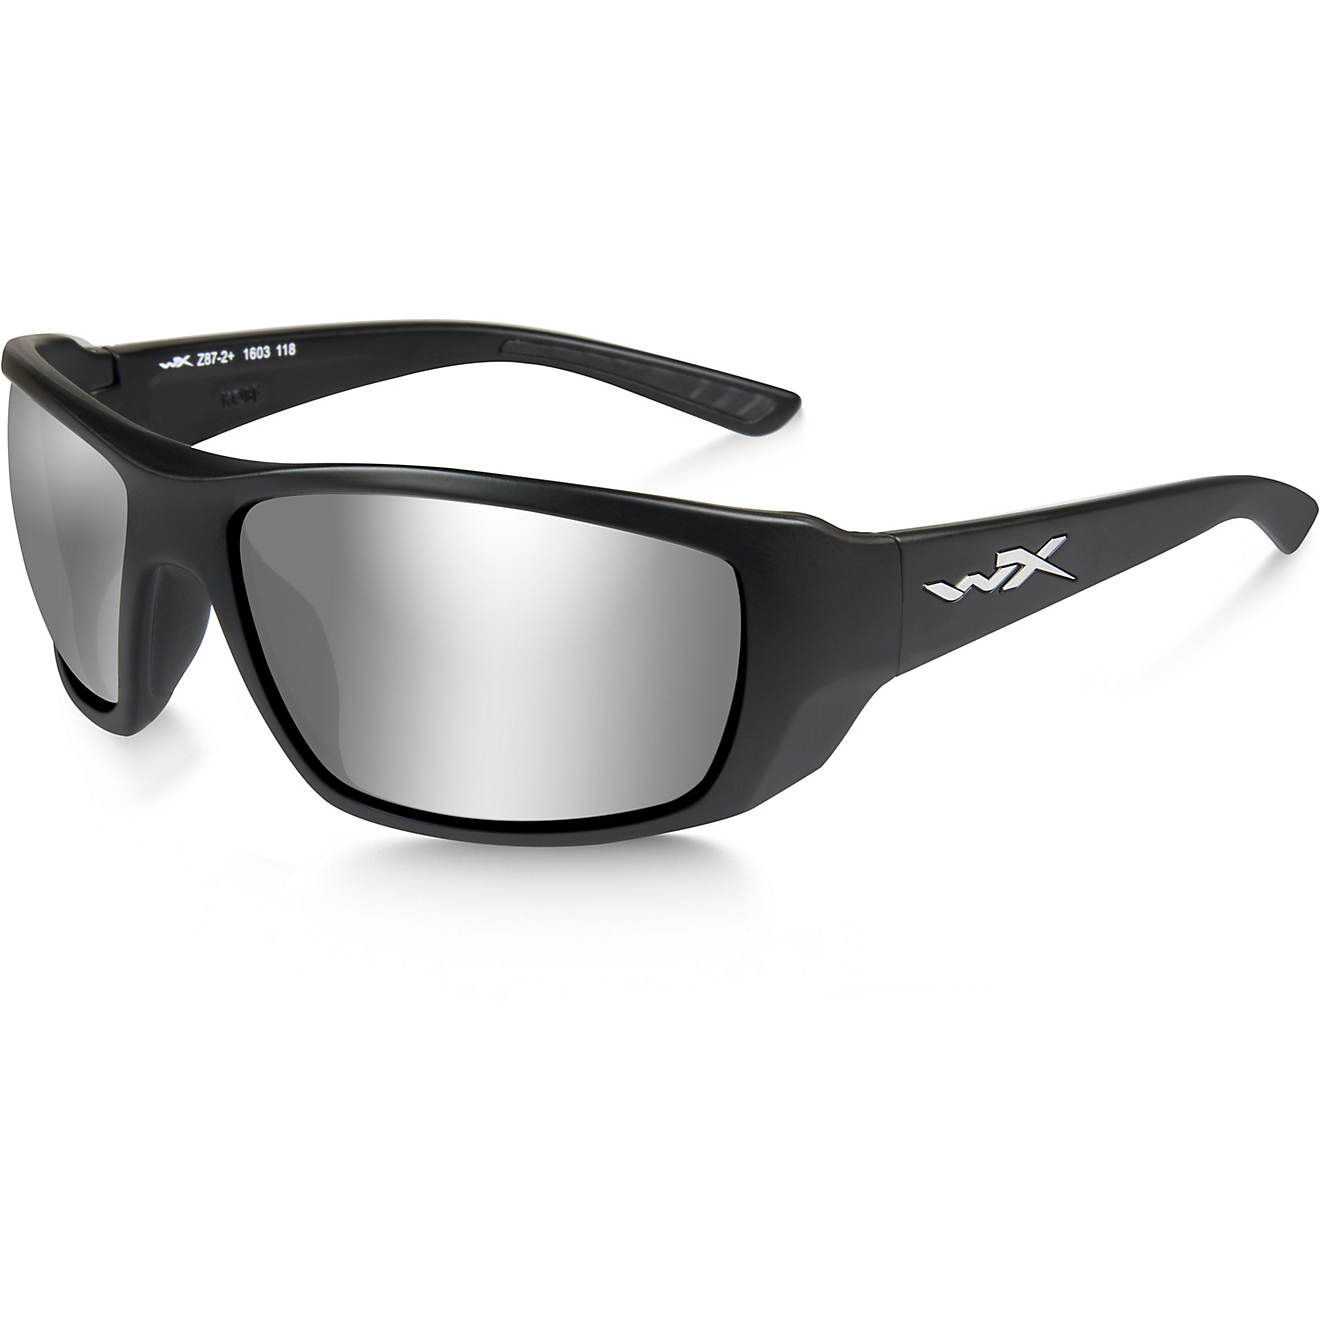 Wiley X Kobe Active Lifestyle Sunglasses                                                                                         - view number 1